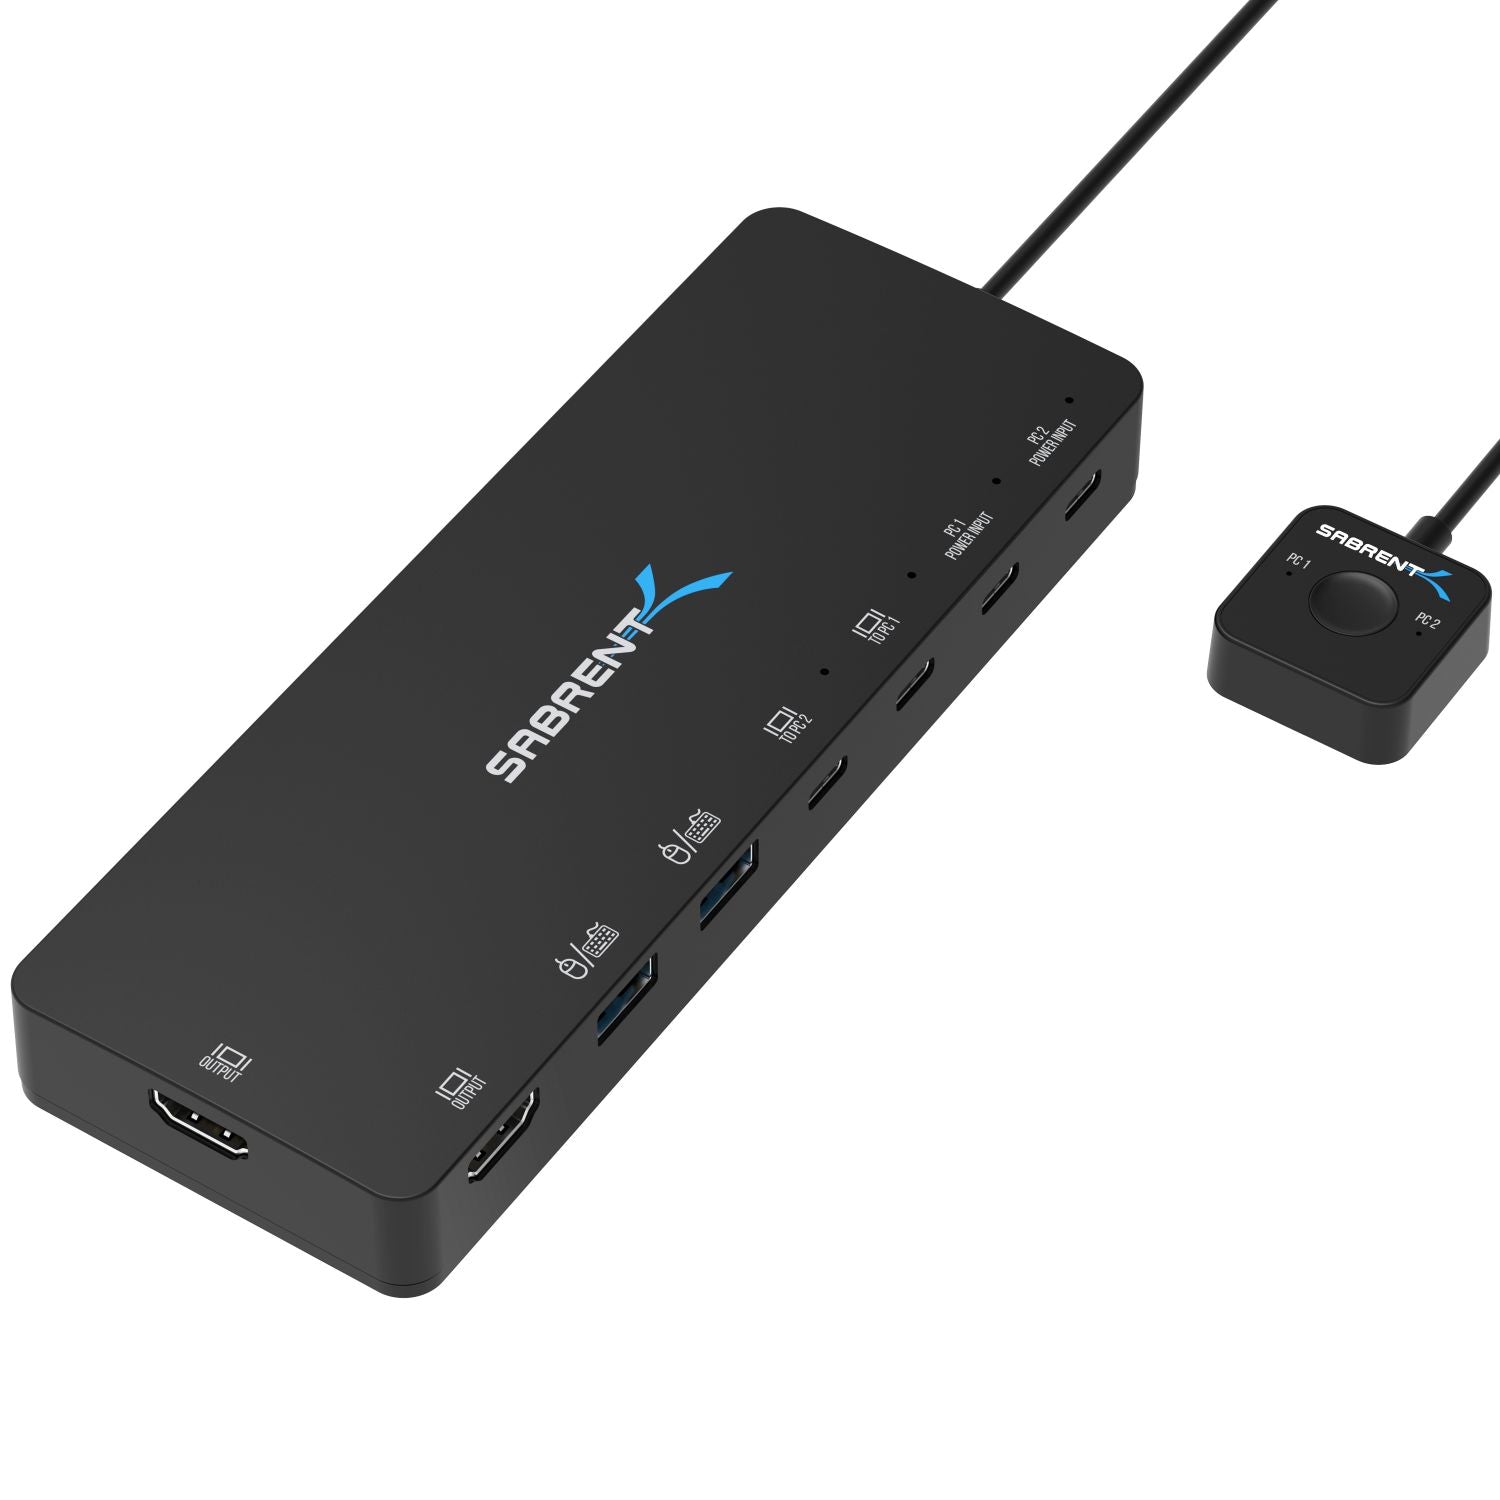 USB 3.0 Sharing Switch - Sabrent